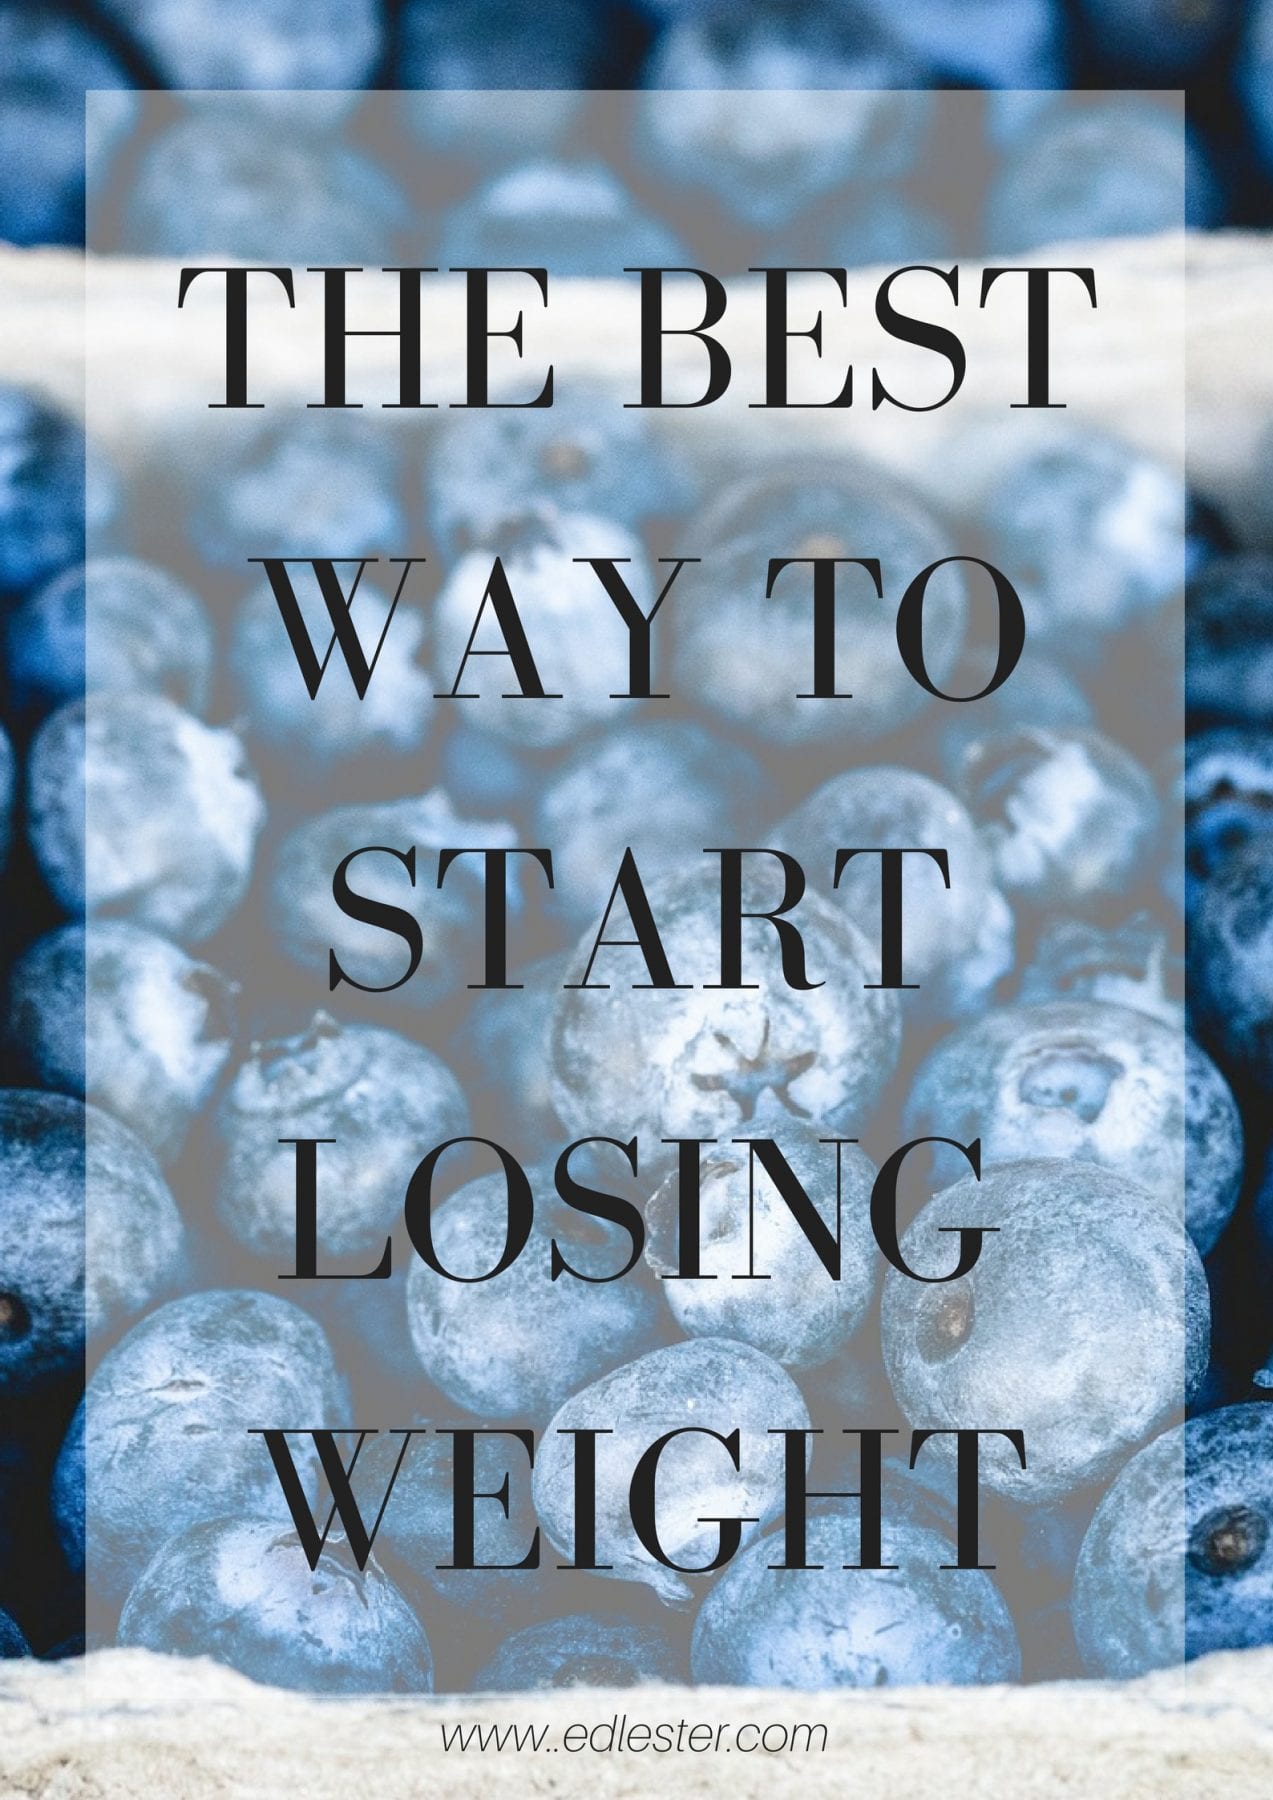 THE BEST WAY TO START LOSING WEIGHT